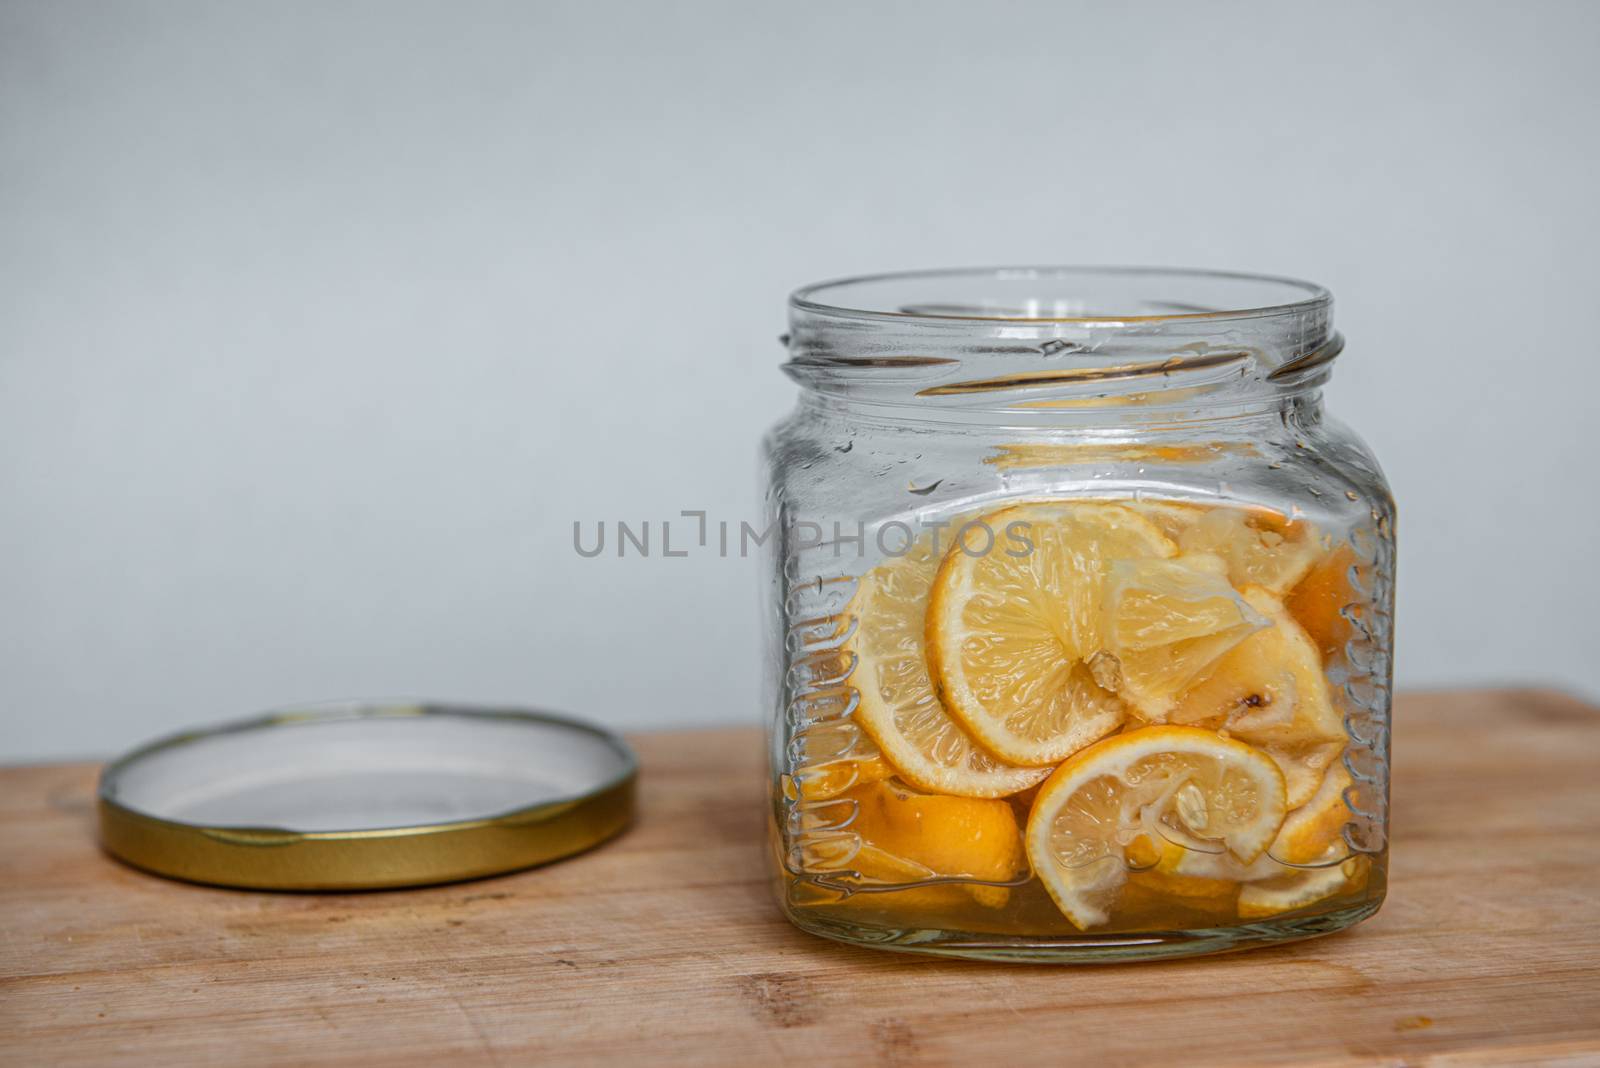 Sweet dessert of thinly sliced lemon with sugar in a glass jar